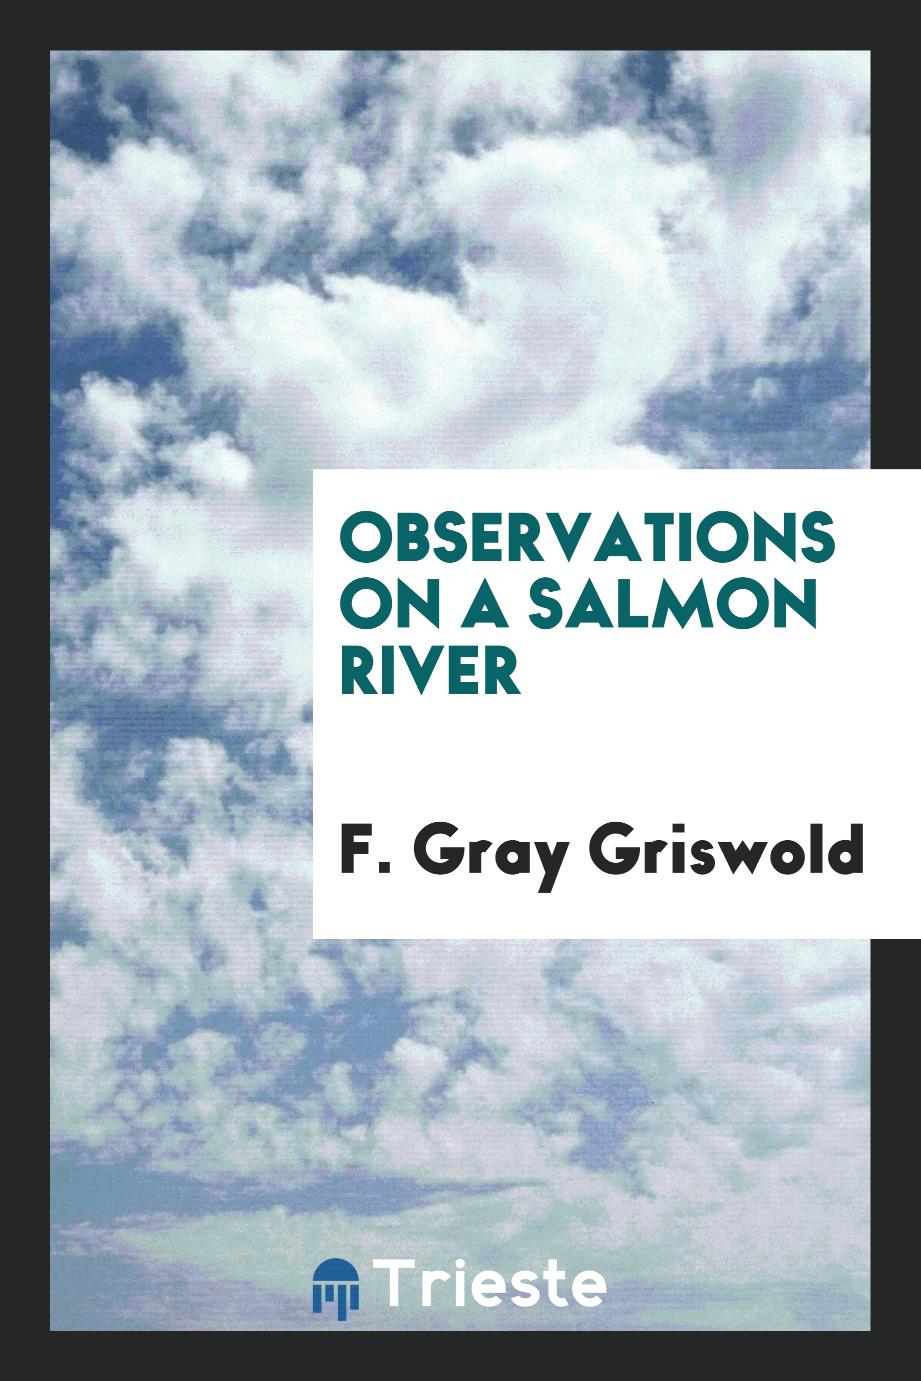 Observations on a salmon river